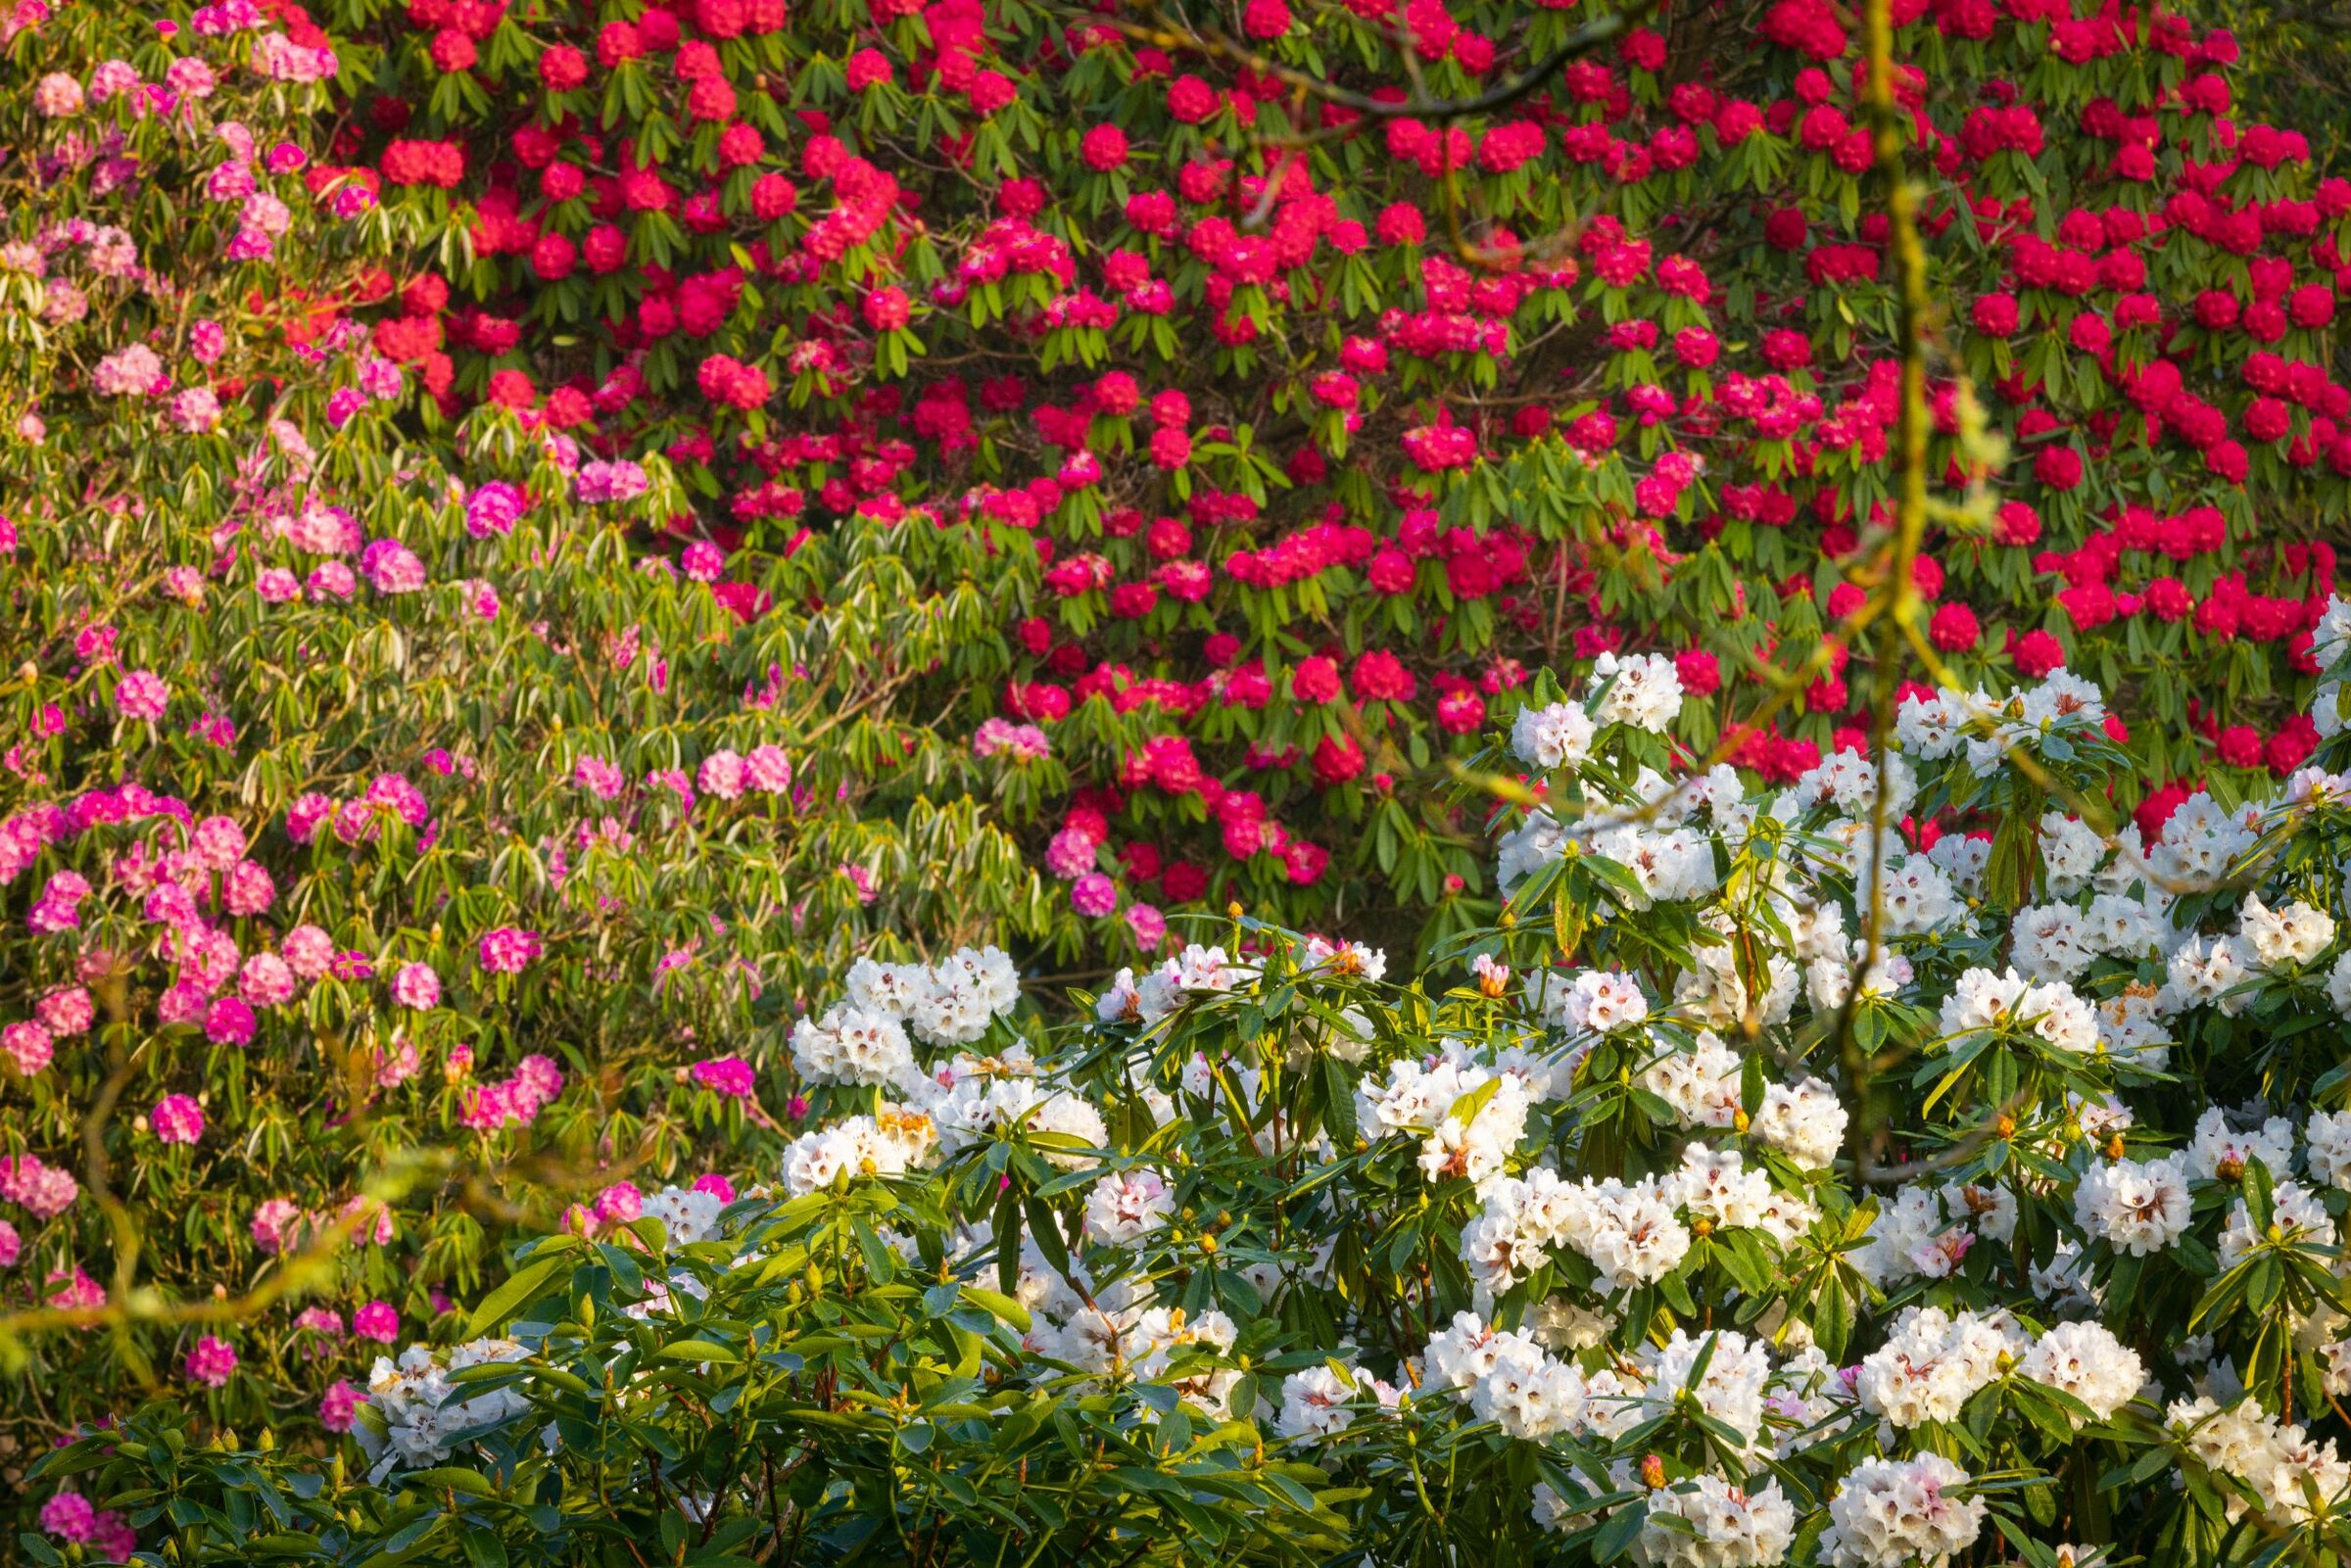 A variety of rhododendron shrubs in white, pink and red